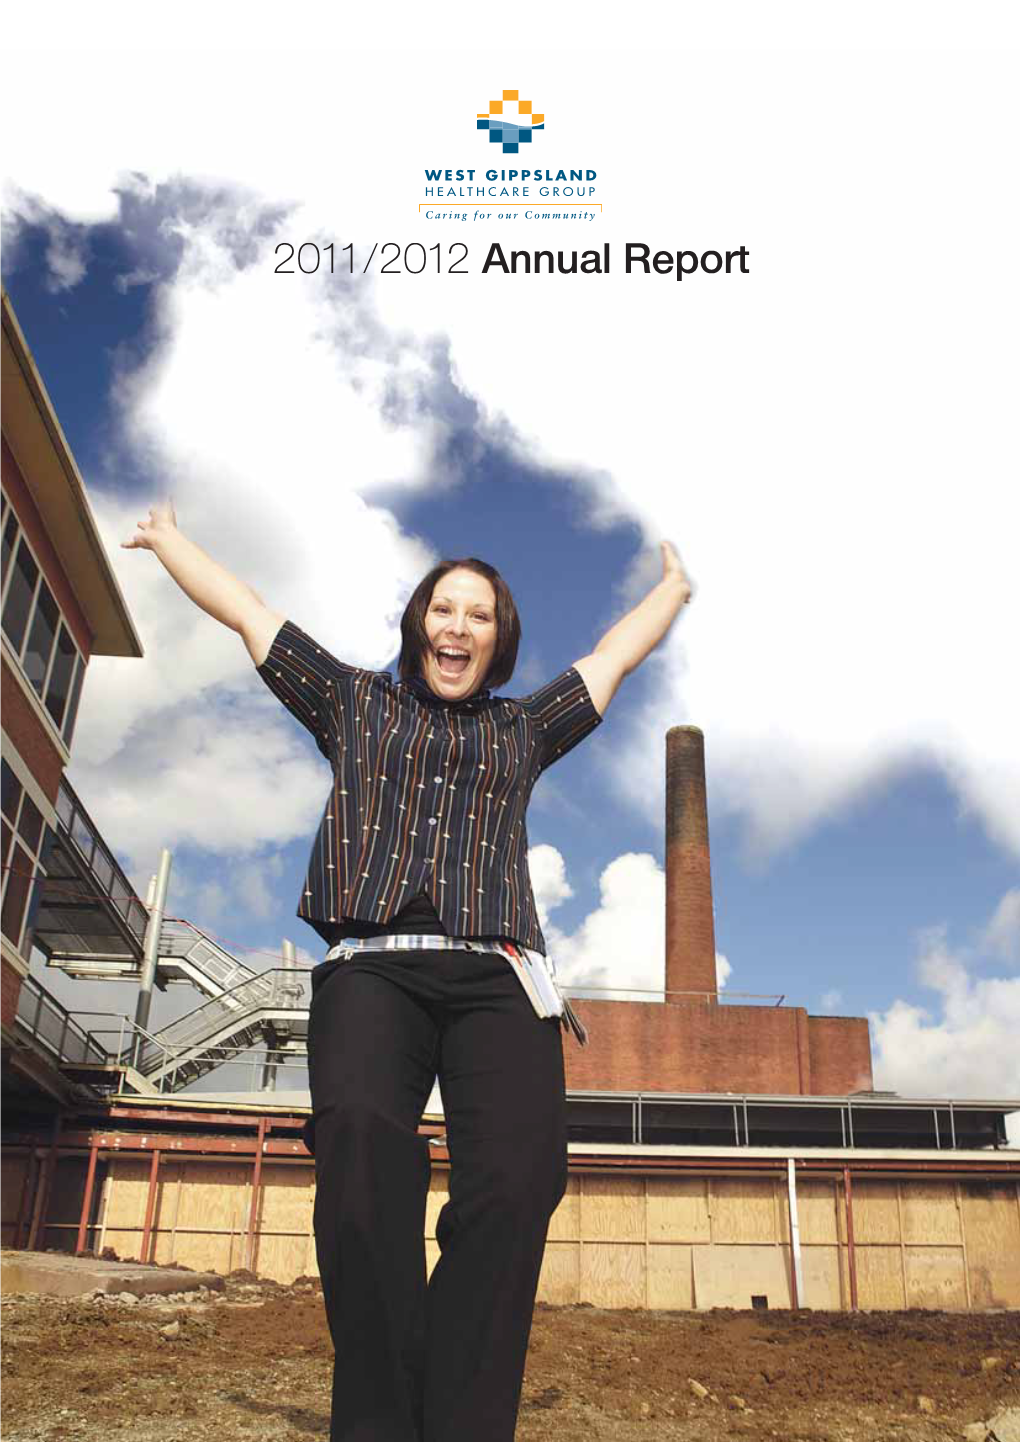 2011/2012 Annual Report Vision: to Improve the Health and Wellbeing of Our Community